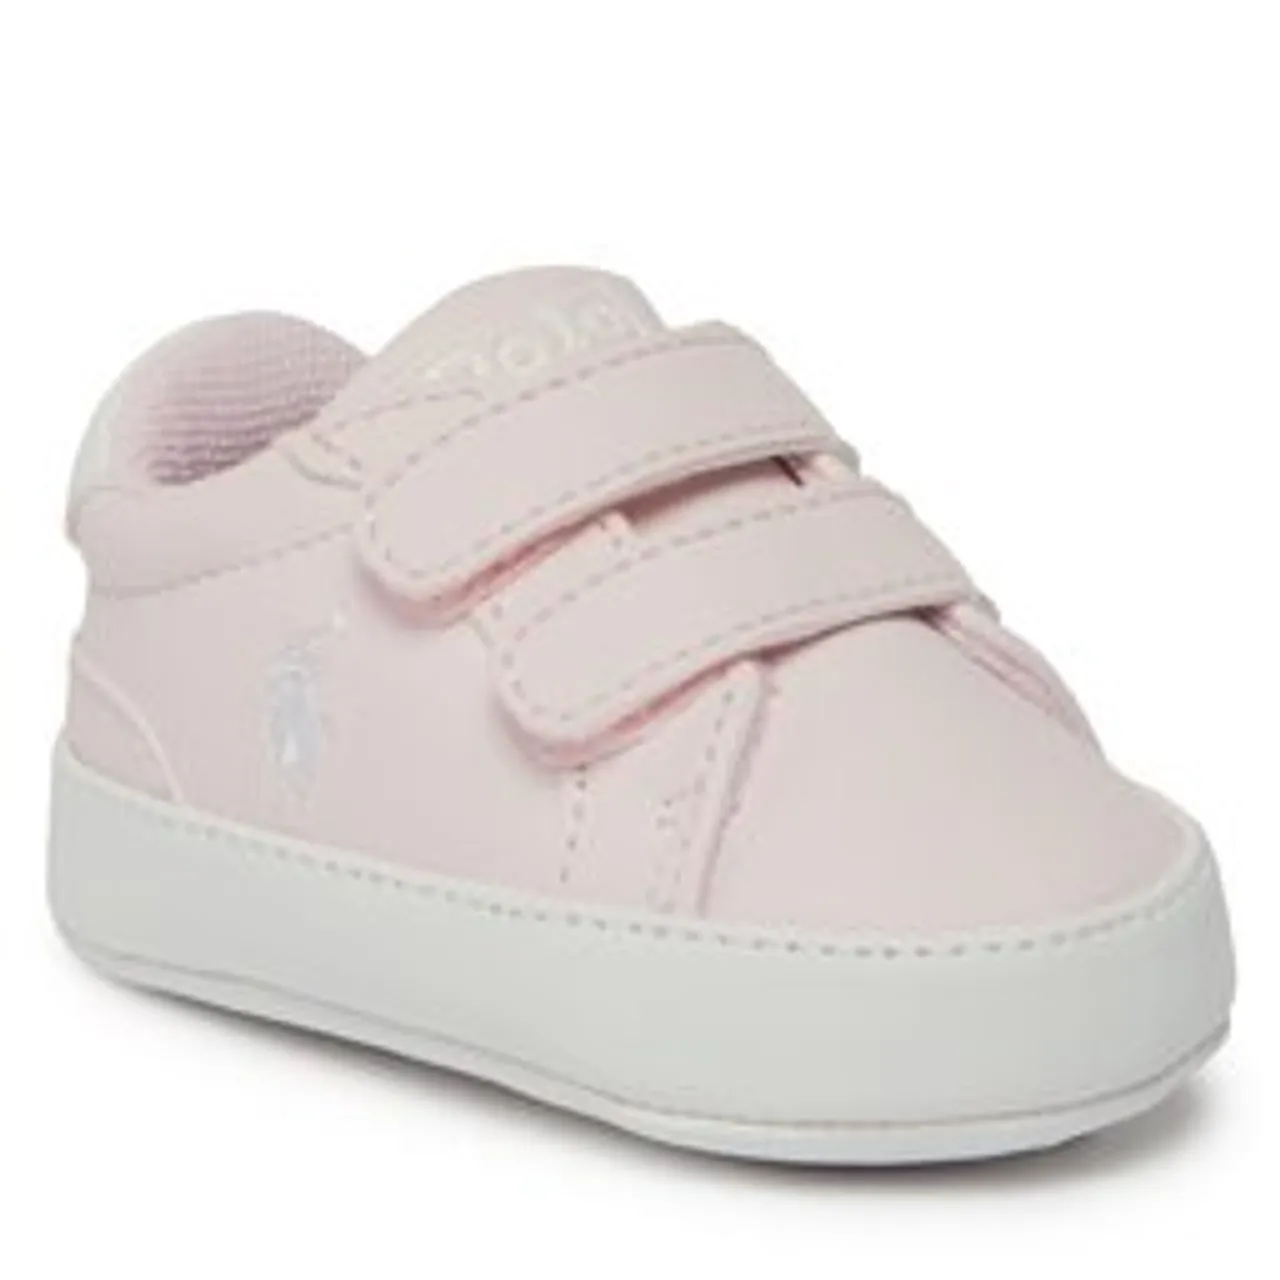 Sneakers Polo Ralph Lauren RL100748 LT PINK SMOOTH W/ WHITE PP